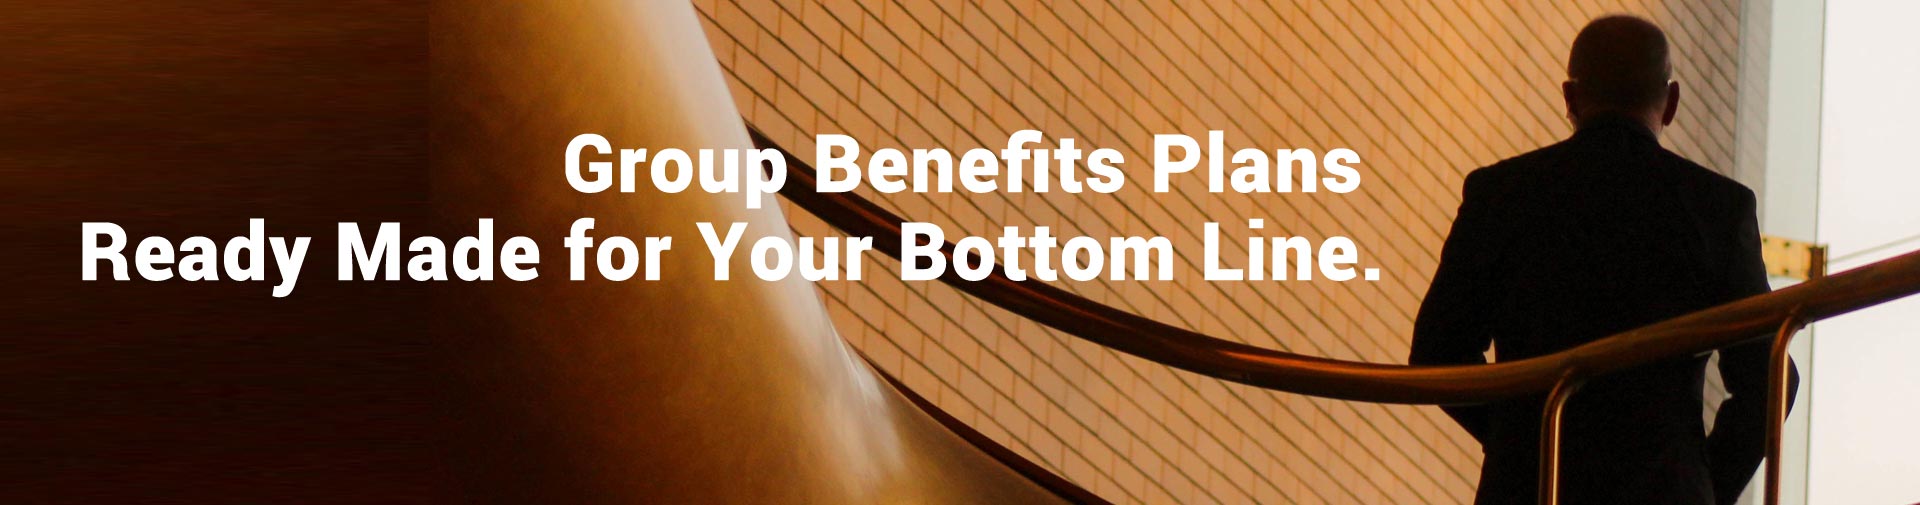 Group Benefits Plans Ready Made for Your Bottom Line.